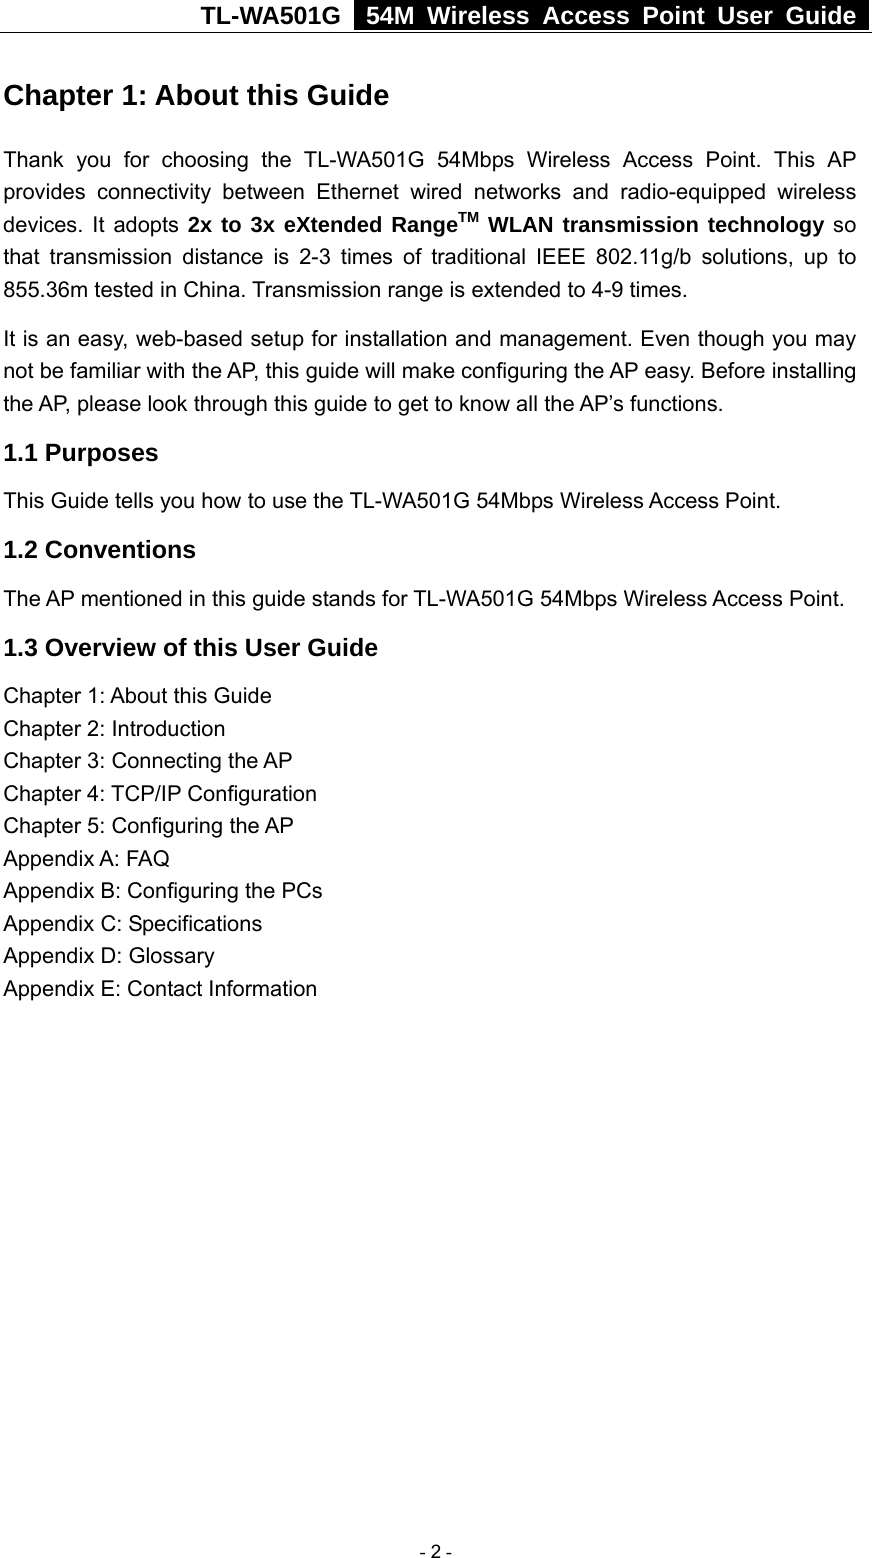 TL-WA501G   54M Wireless Access Point User Guide  Chapter 1: About this Guide Thank you for choosing the TL-WA501G 54Mbps Wireless Access Point. This AP provides connectivity between Ethernet wired networks and radio-equipped wireless devices. It adopts 2x to 3x eXtended RangeTM WLAN transmission technology so that transmission distance is 2-3 times of traditional IEEE 802.11g/b solutions, up to 855.36m tested in China. Transmission range is extended to 4-9 times. It is an easy, web-based setup for installation and management. Even though you may not be familiar with the AP, this guide will make configuring the AP easy. Before installing the AP, please look through this guide to get to know all the AP’s functions. 1.1 Purposes This Guide tells you how to use the TL-WA501G 54Mbps Wireless Access Point.   1.2 Conventions The AP mentioned in this guide stands for TL-WA501G 54Mbps Wireless Access Point. 1.3 Overview of this User Guide Chapter 1: About this Guide Chapter 2: Introduction Chapter 3: Connecting the AP Chapter 4: TCP/IP Configuration Chapter 5: Configuring the AP Appendix A: FAQ Appendix B: Configuring the PCs Appendix C: Specifications Appendix D: Glossary Appendix E: Contact Information  - 2 - 